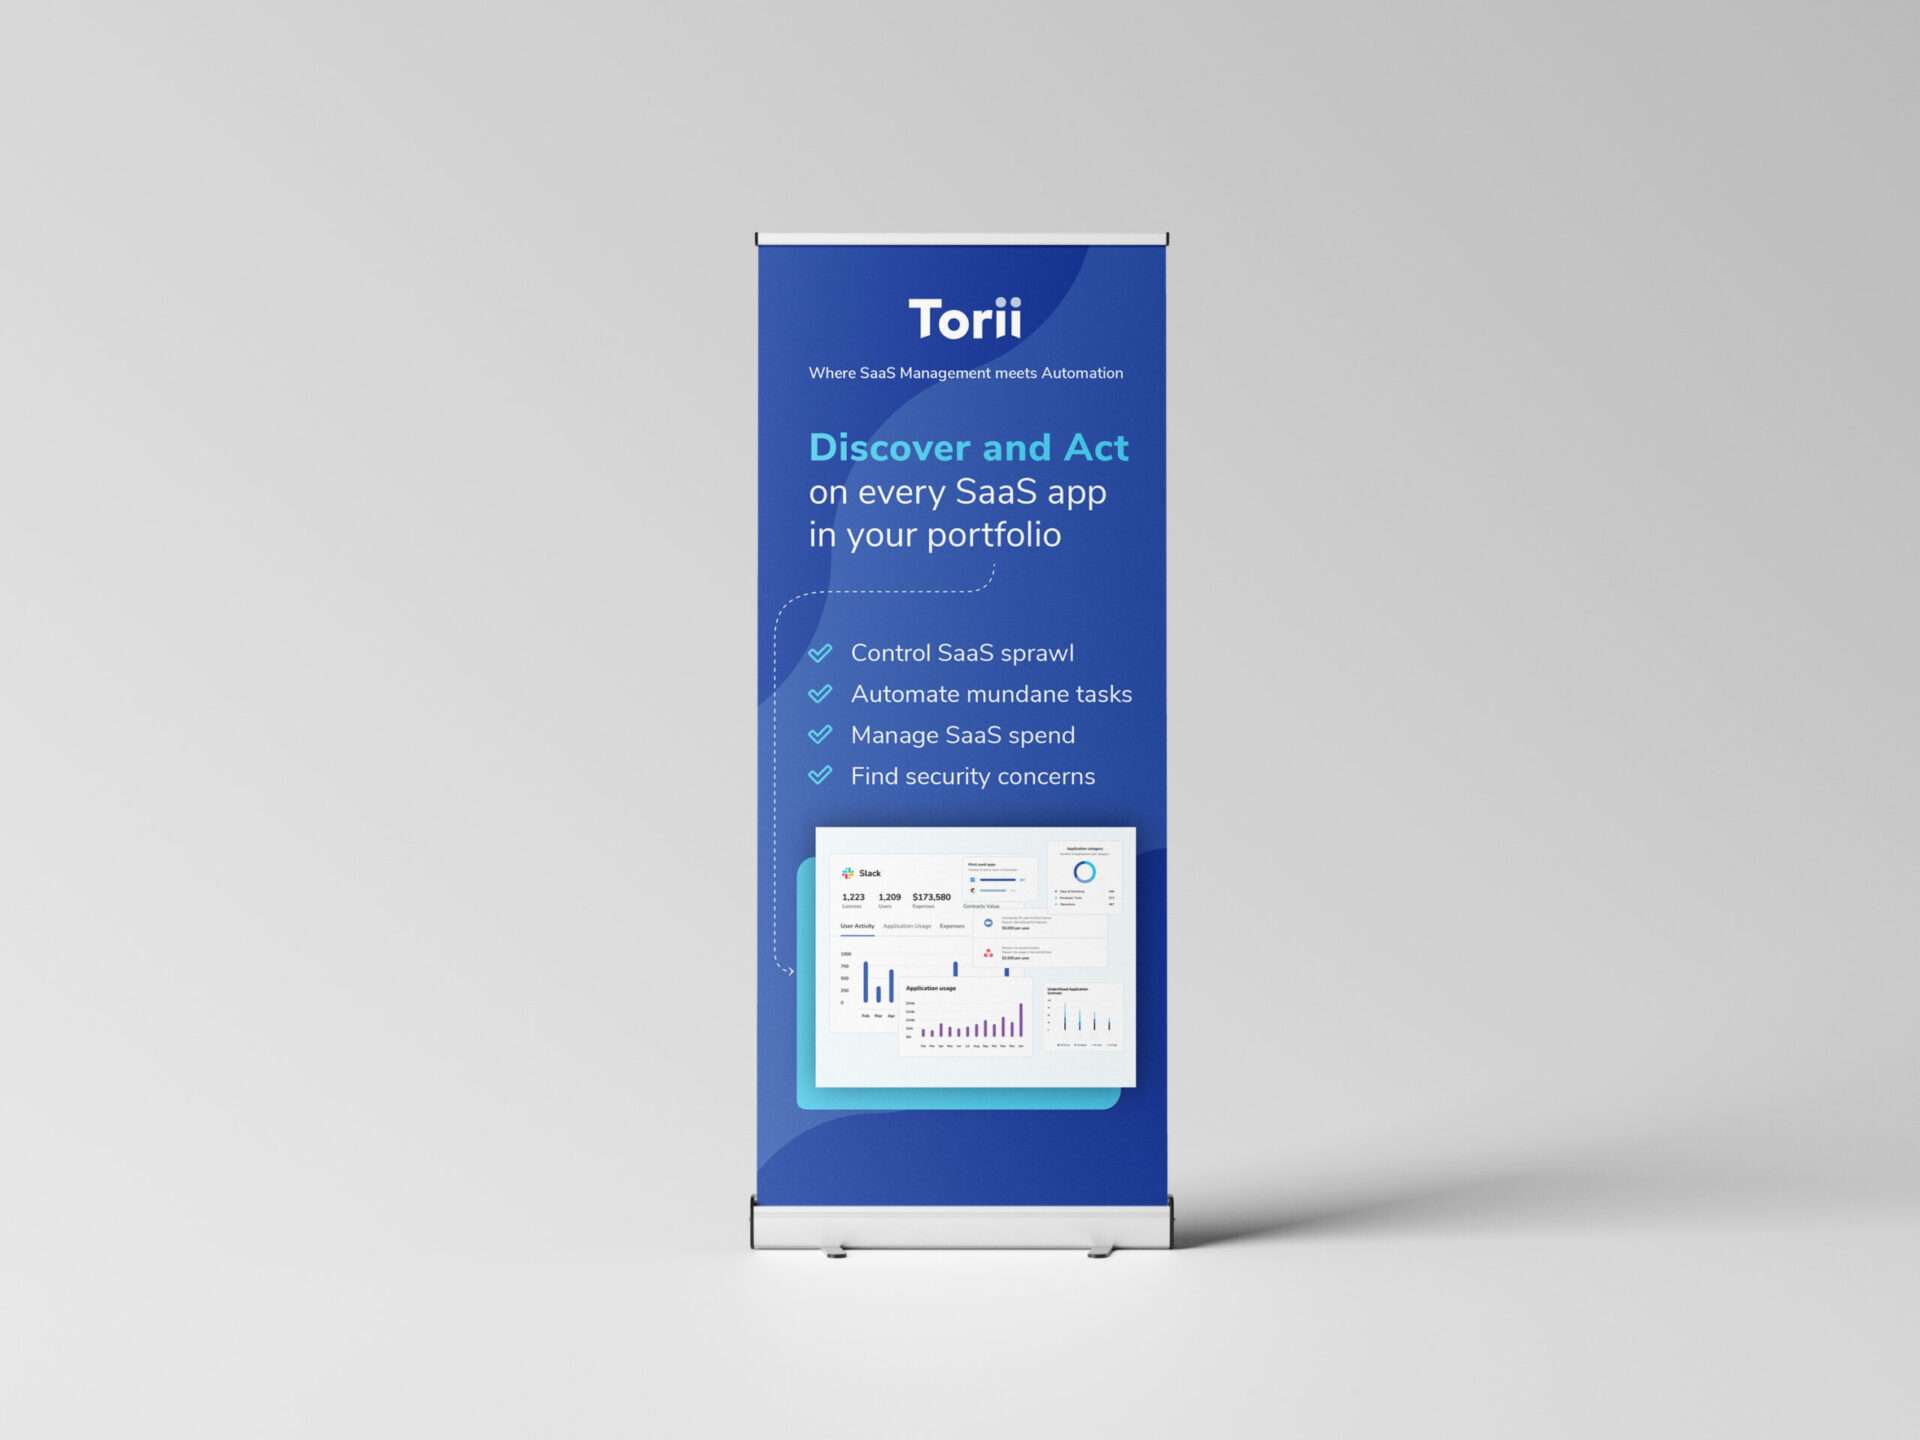 image of a deep blue abstract banner design for SAAS company Torii